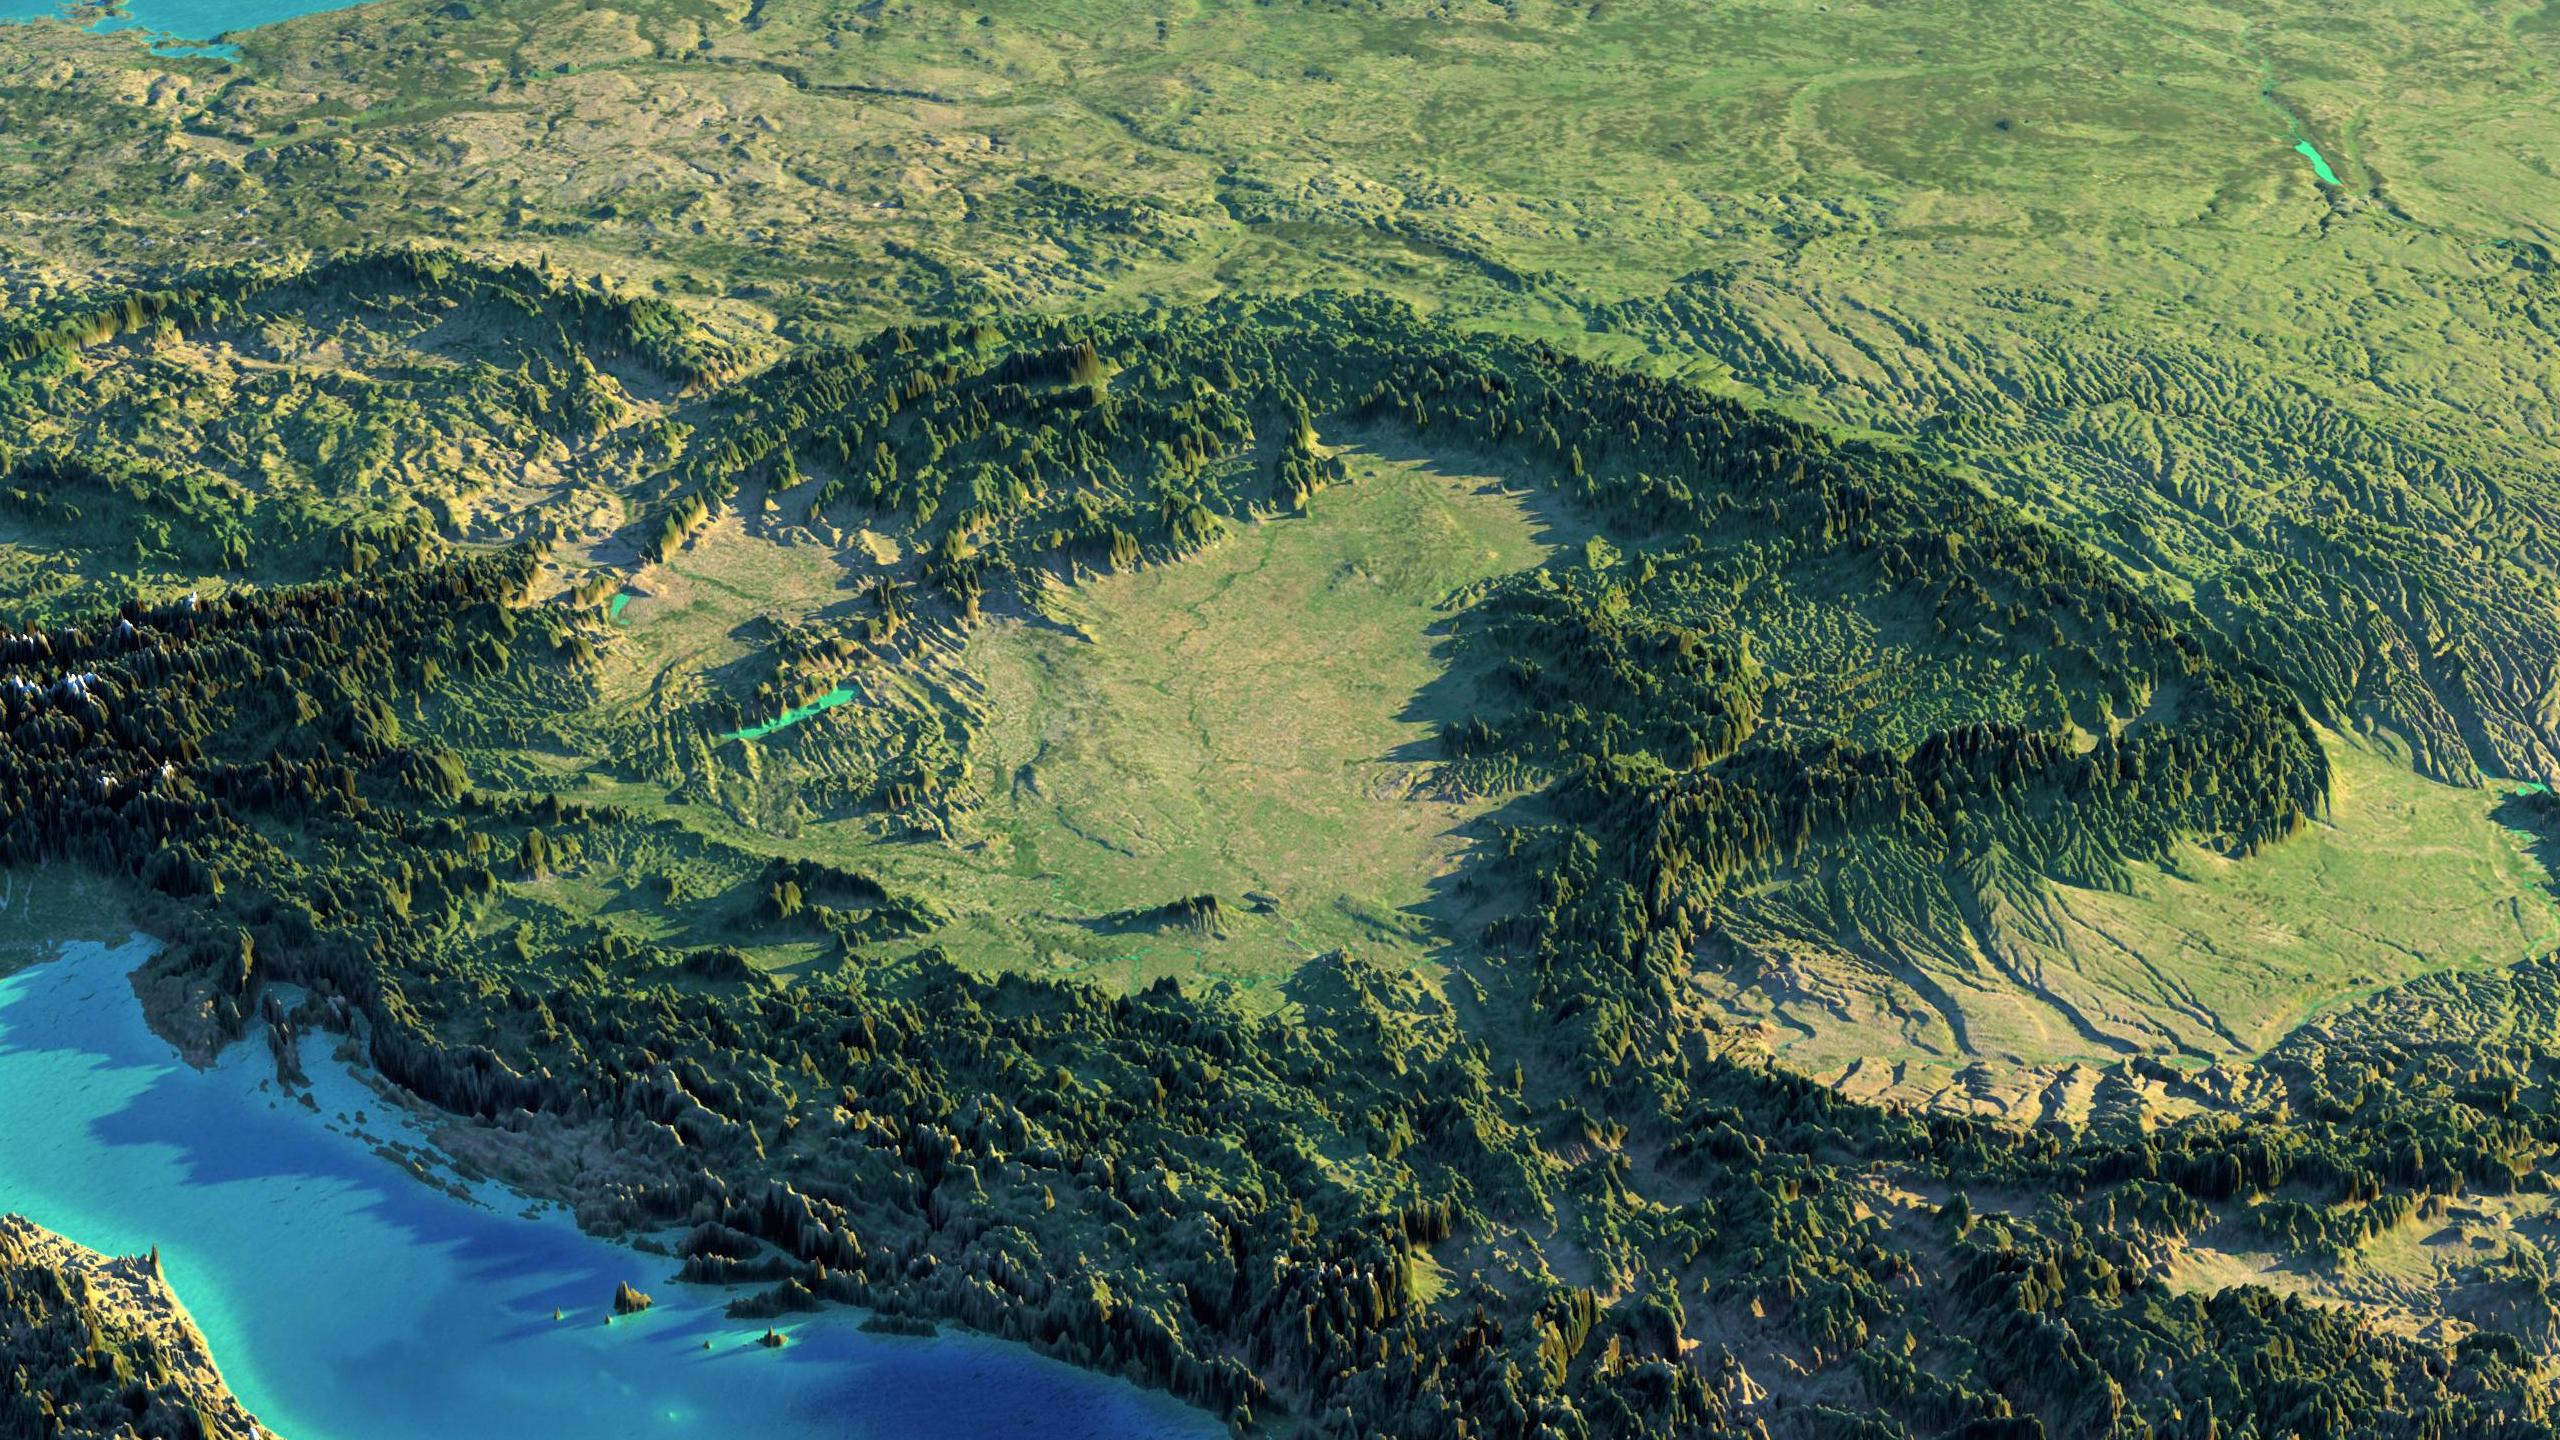 fascinating-relief-maps-show-the-worlds-mountain-ranges-31967-anton-balazh-3d-map-crop.jpg